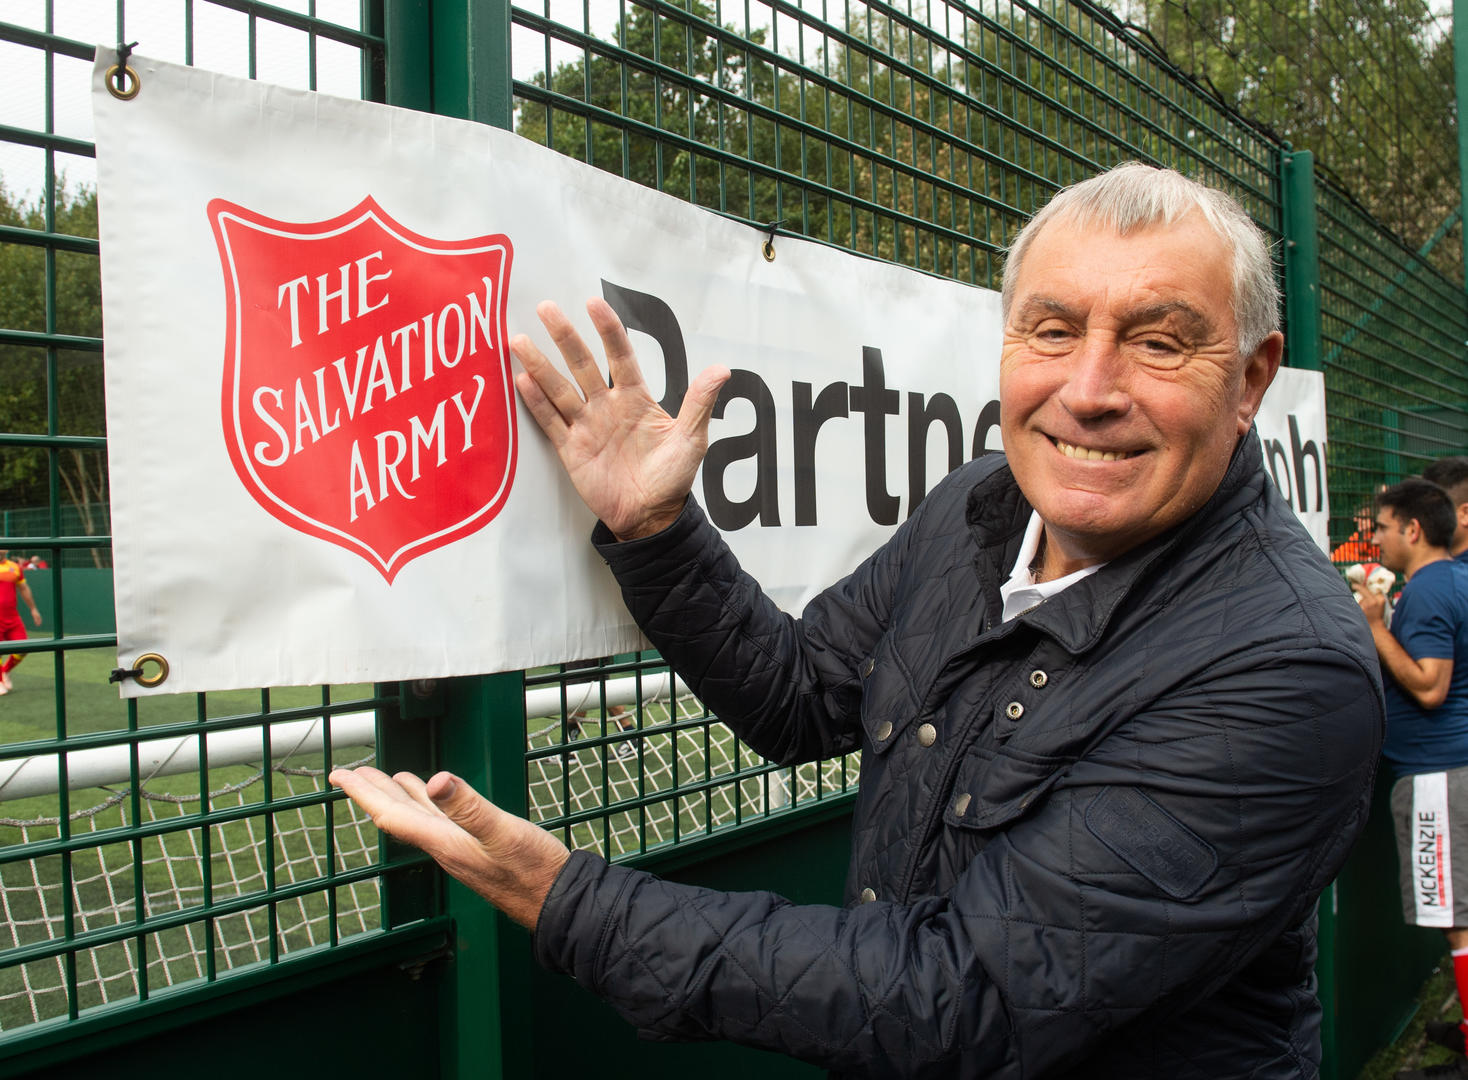 Peter Shilton standing next to the Partnership Trophy banner and pointing to the Salvation Army red shield.